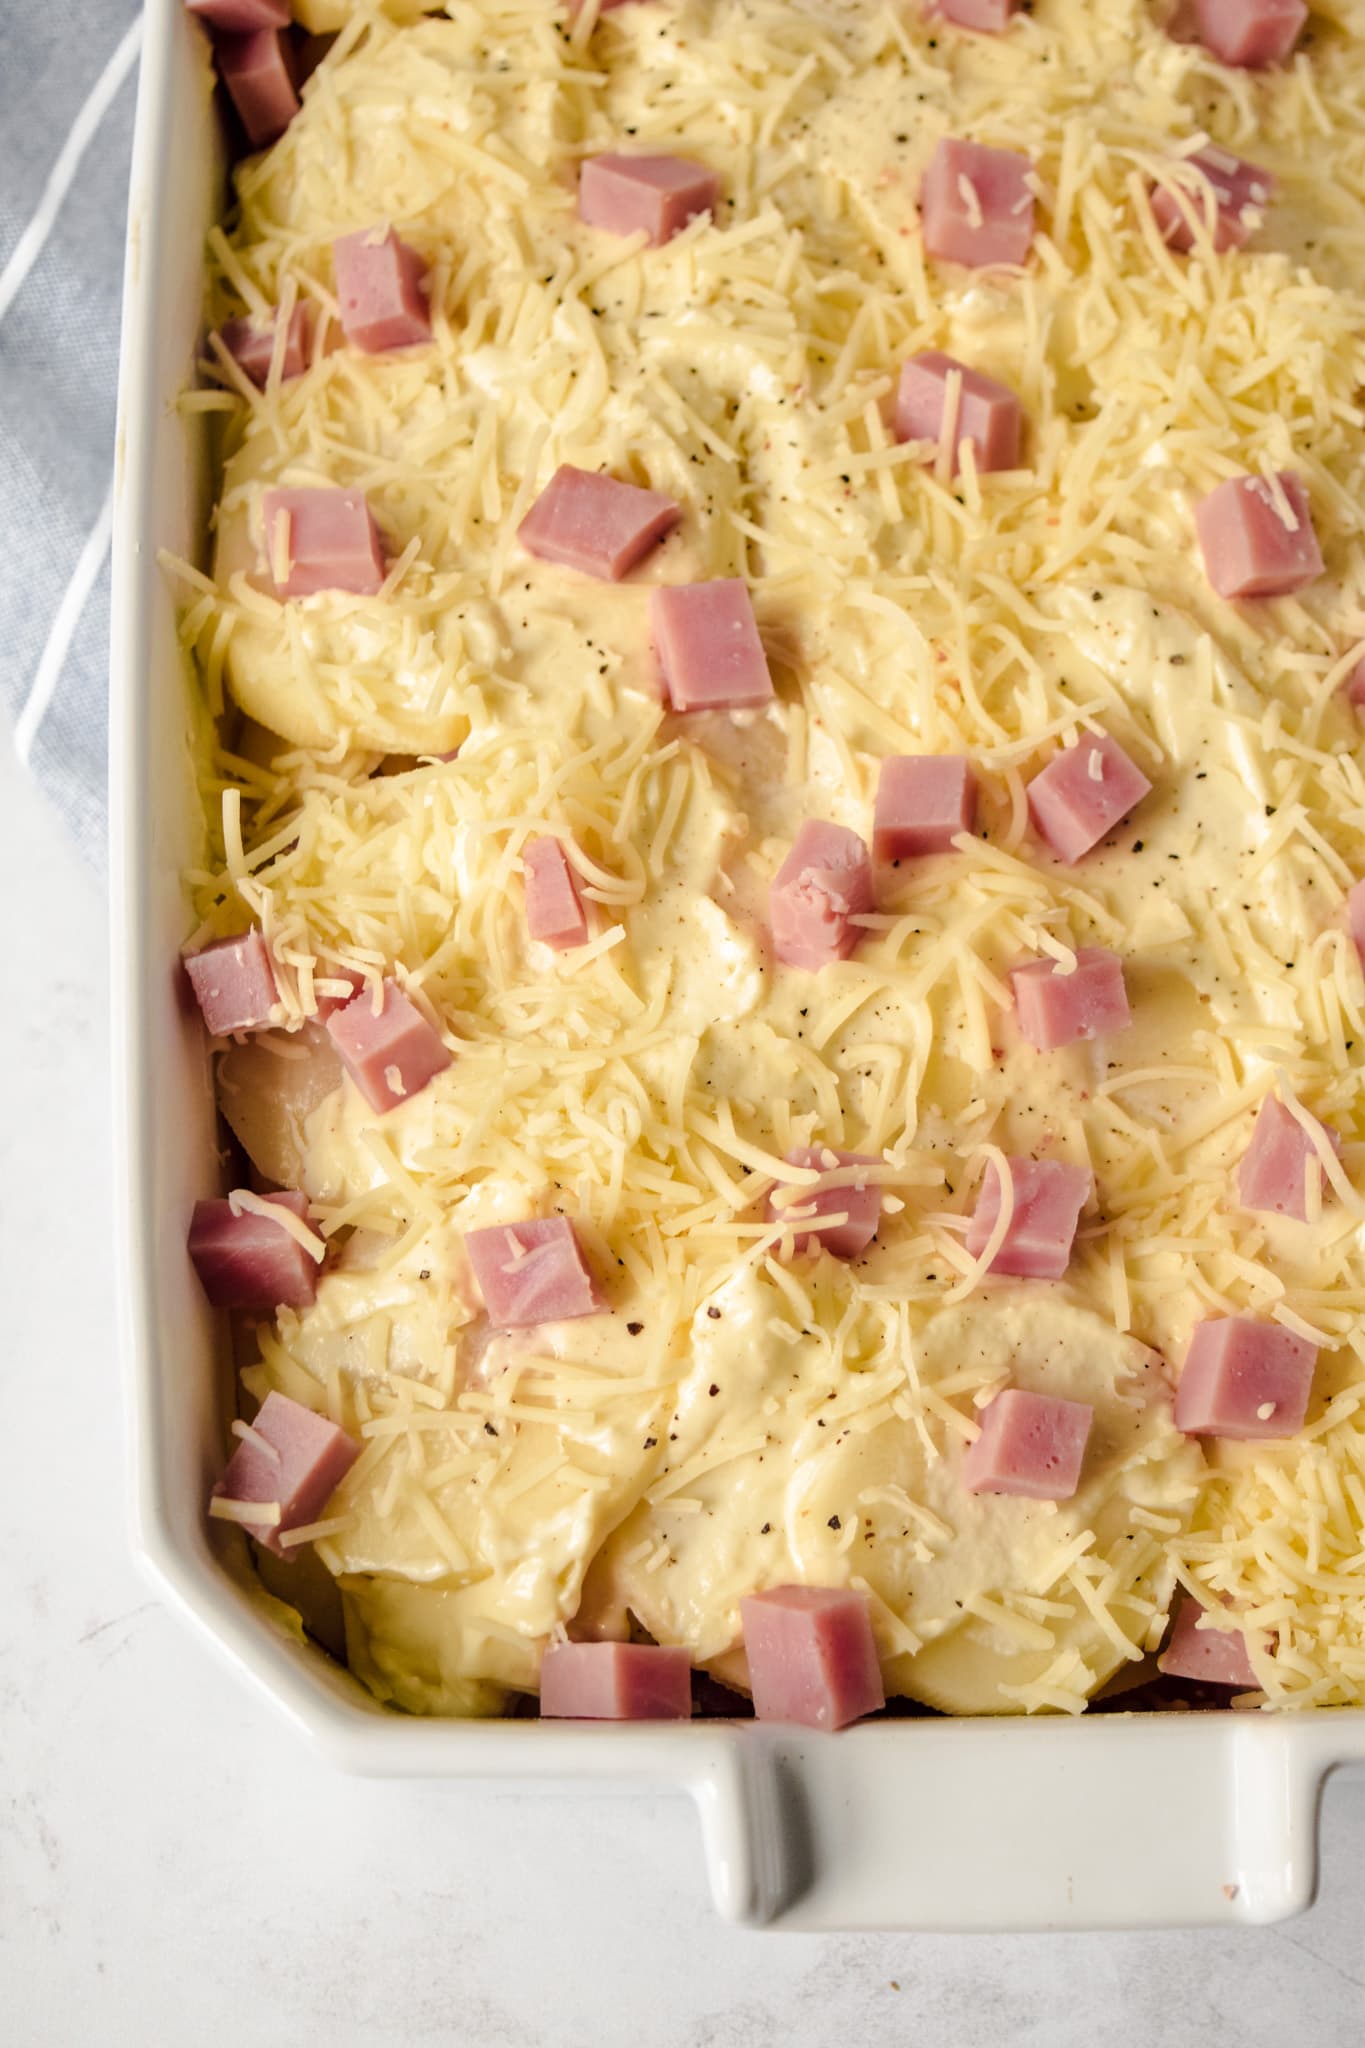 Scalloped potatoes with ham in a white rectangular baking dish